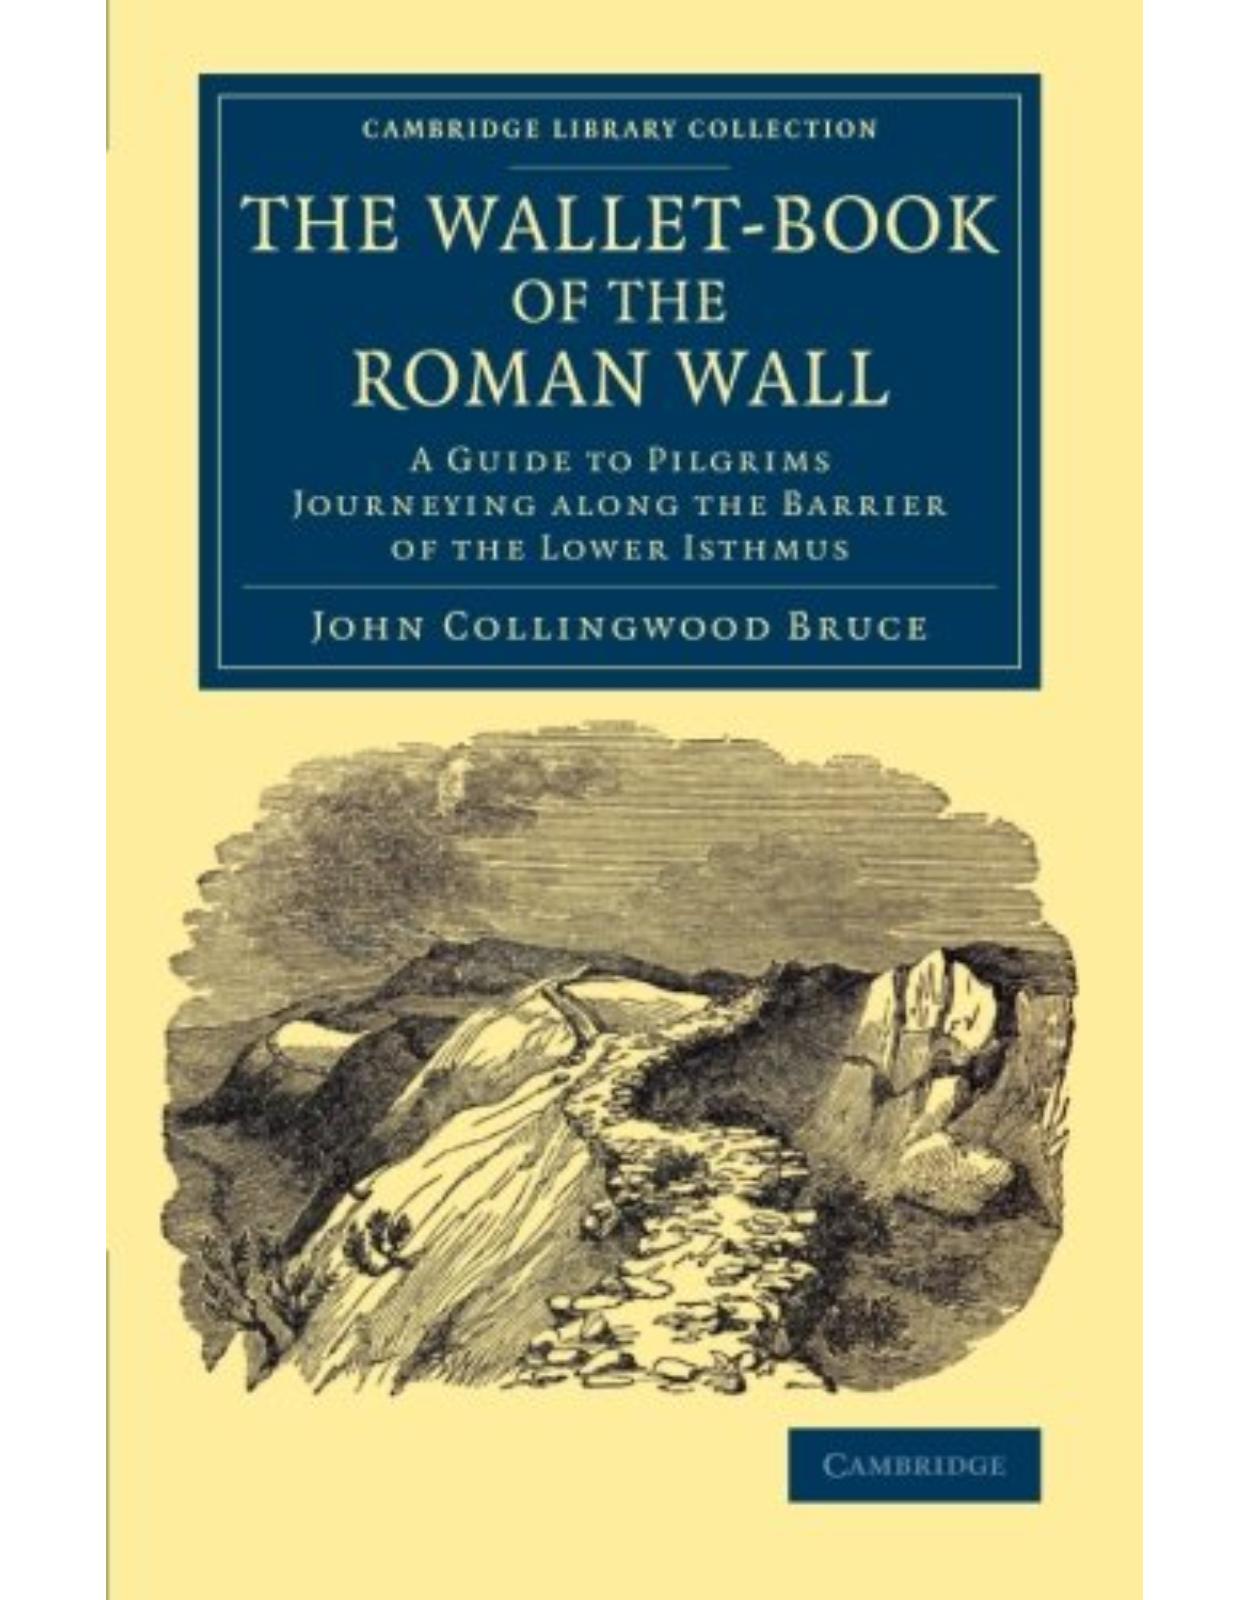 The Wallet-Book of the Roman Wall: A Guide to Pilgrims Journeying along the Barrier of the Lower Isthmus (Cambridge Library Collection - Archaeology)